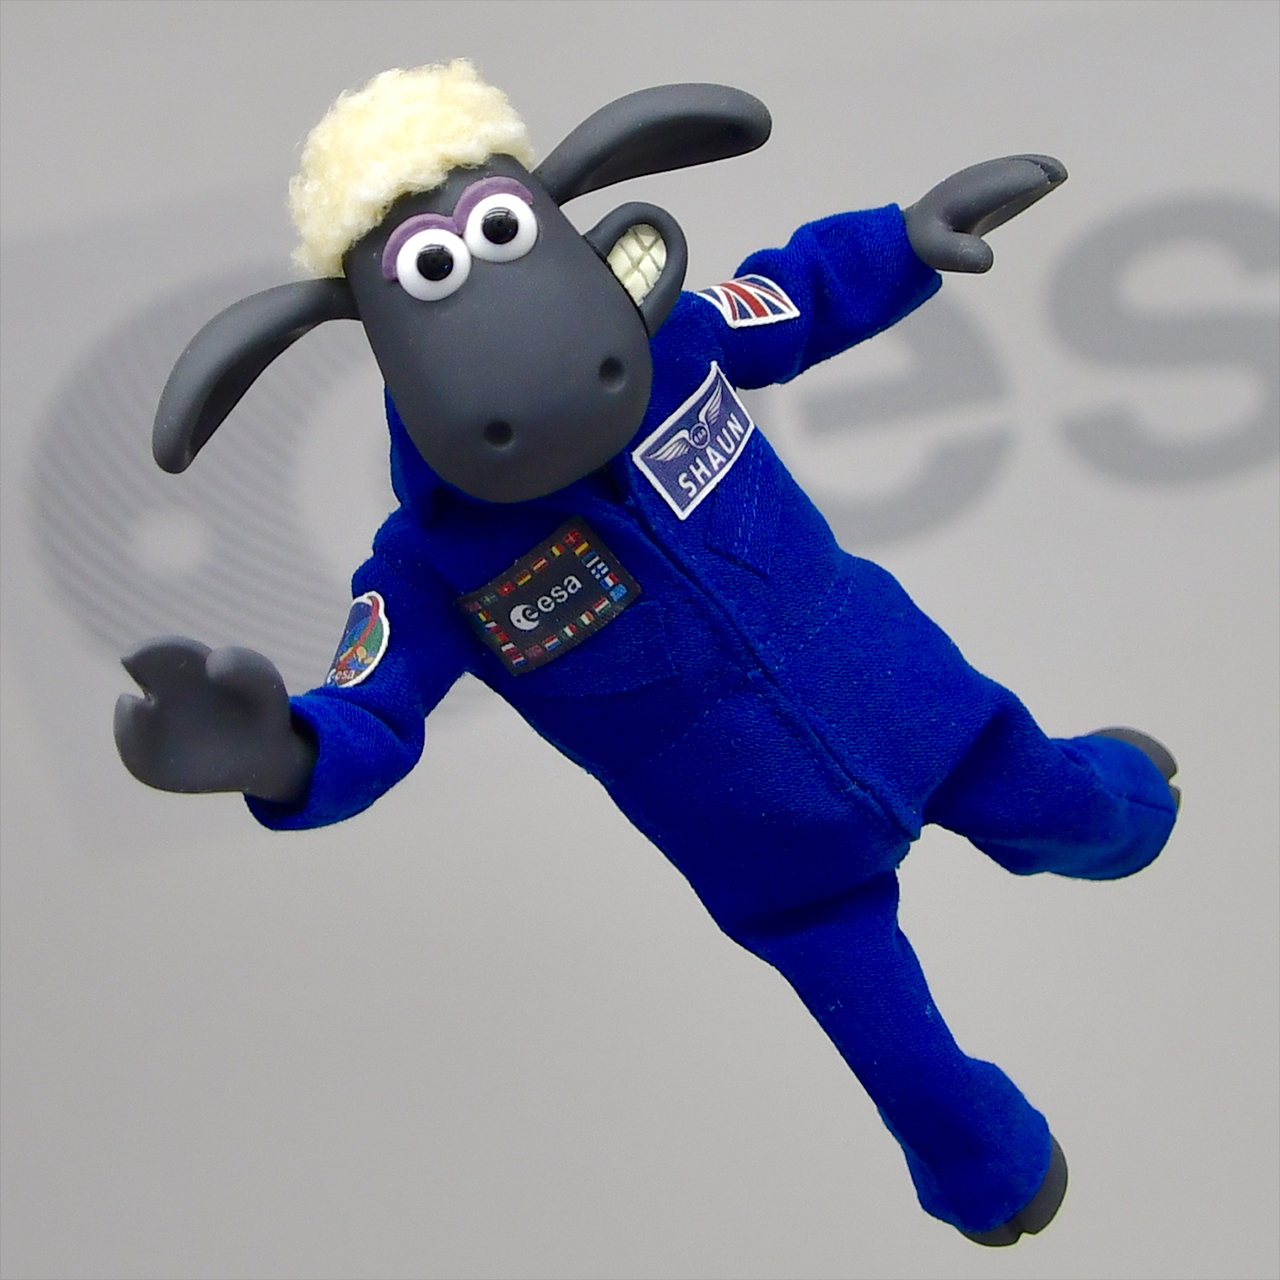 "While that may be a small step for a human, it's a giant leap for the lamb," said ESA's David Parker of Shaun the Sheep's upcoming space journey.